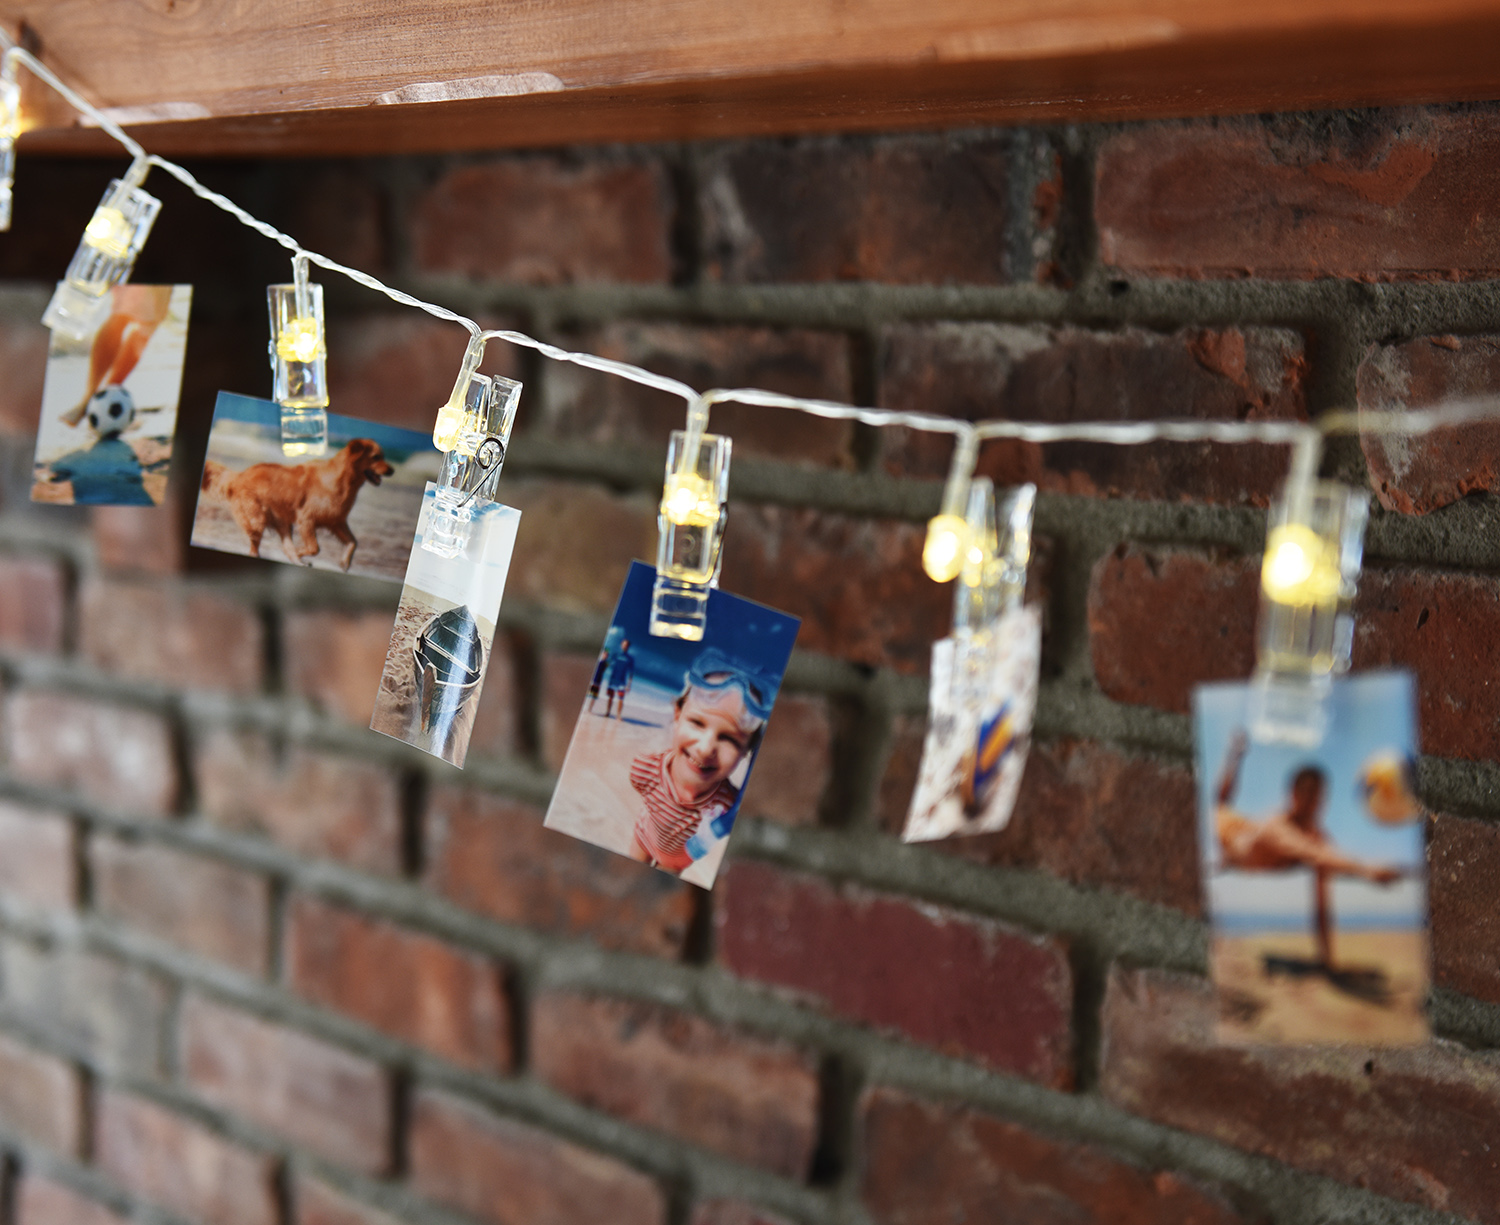 The Polaroid LED string light with LED photo clips